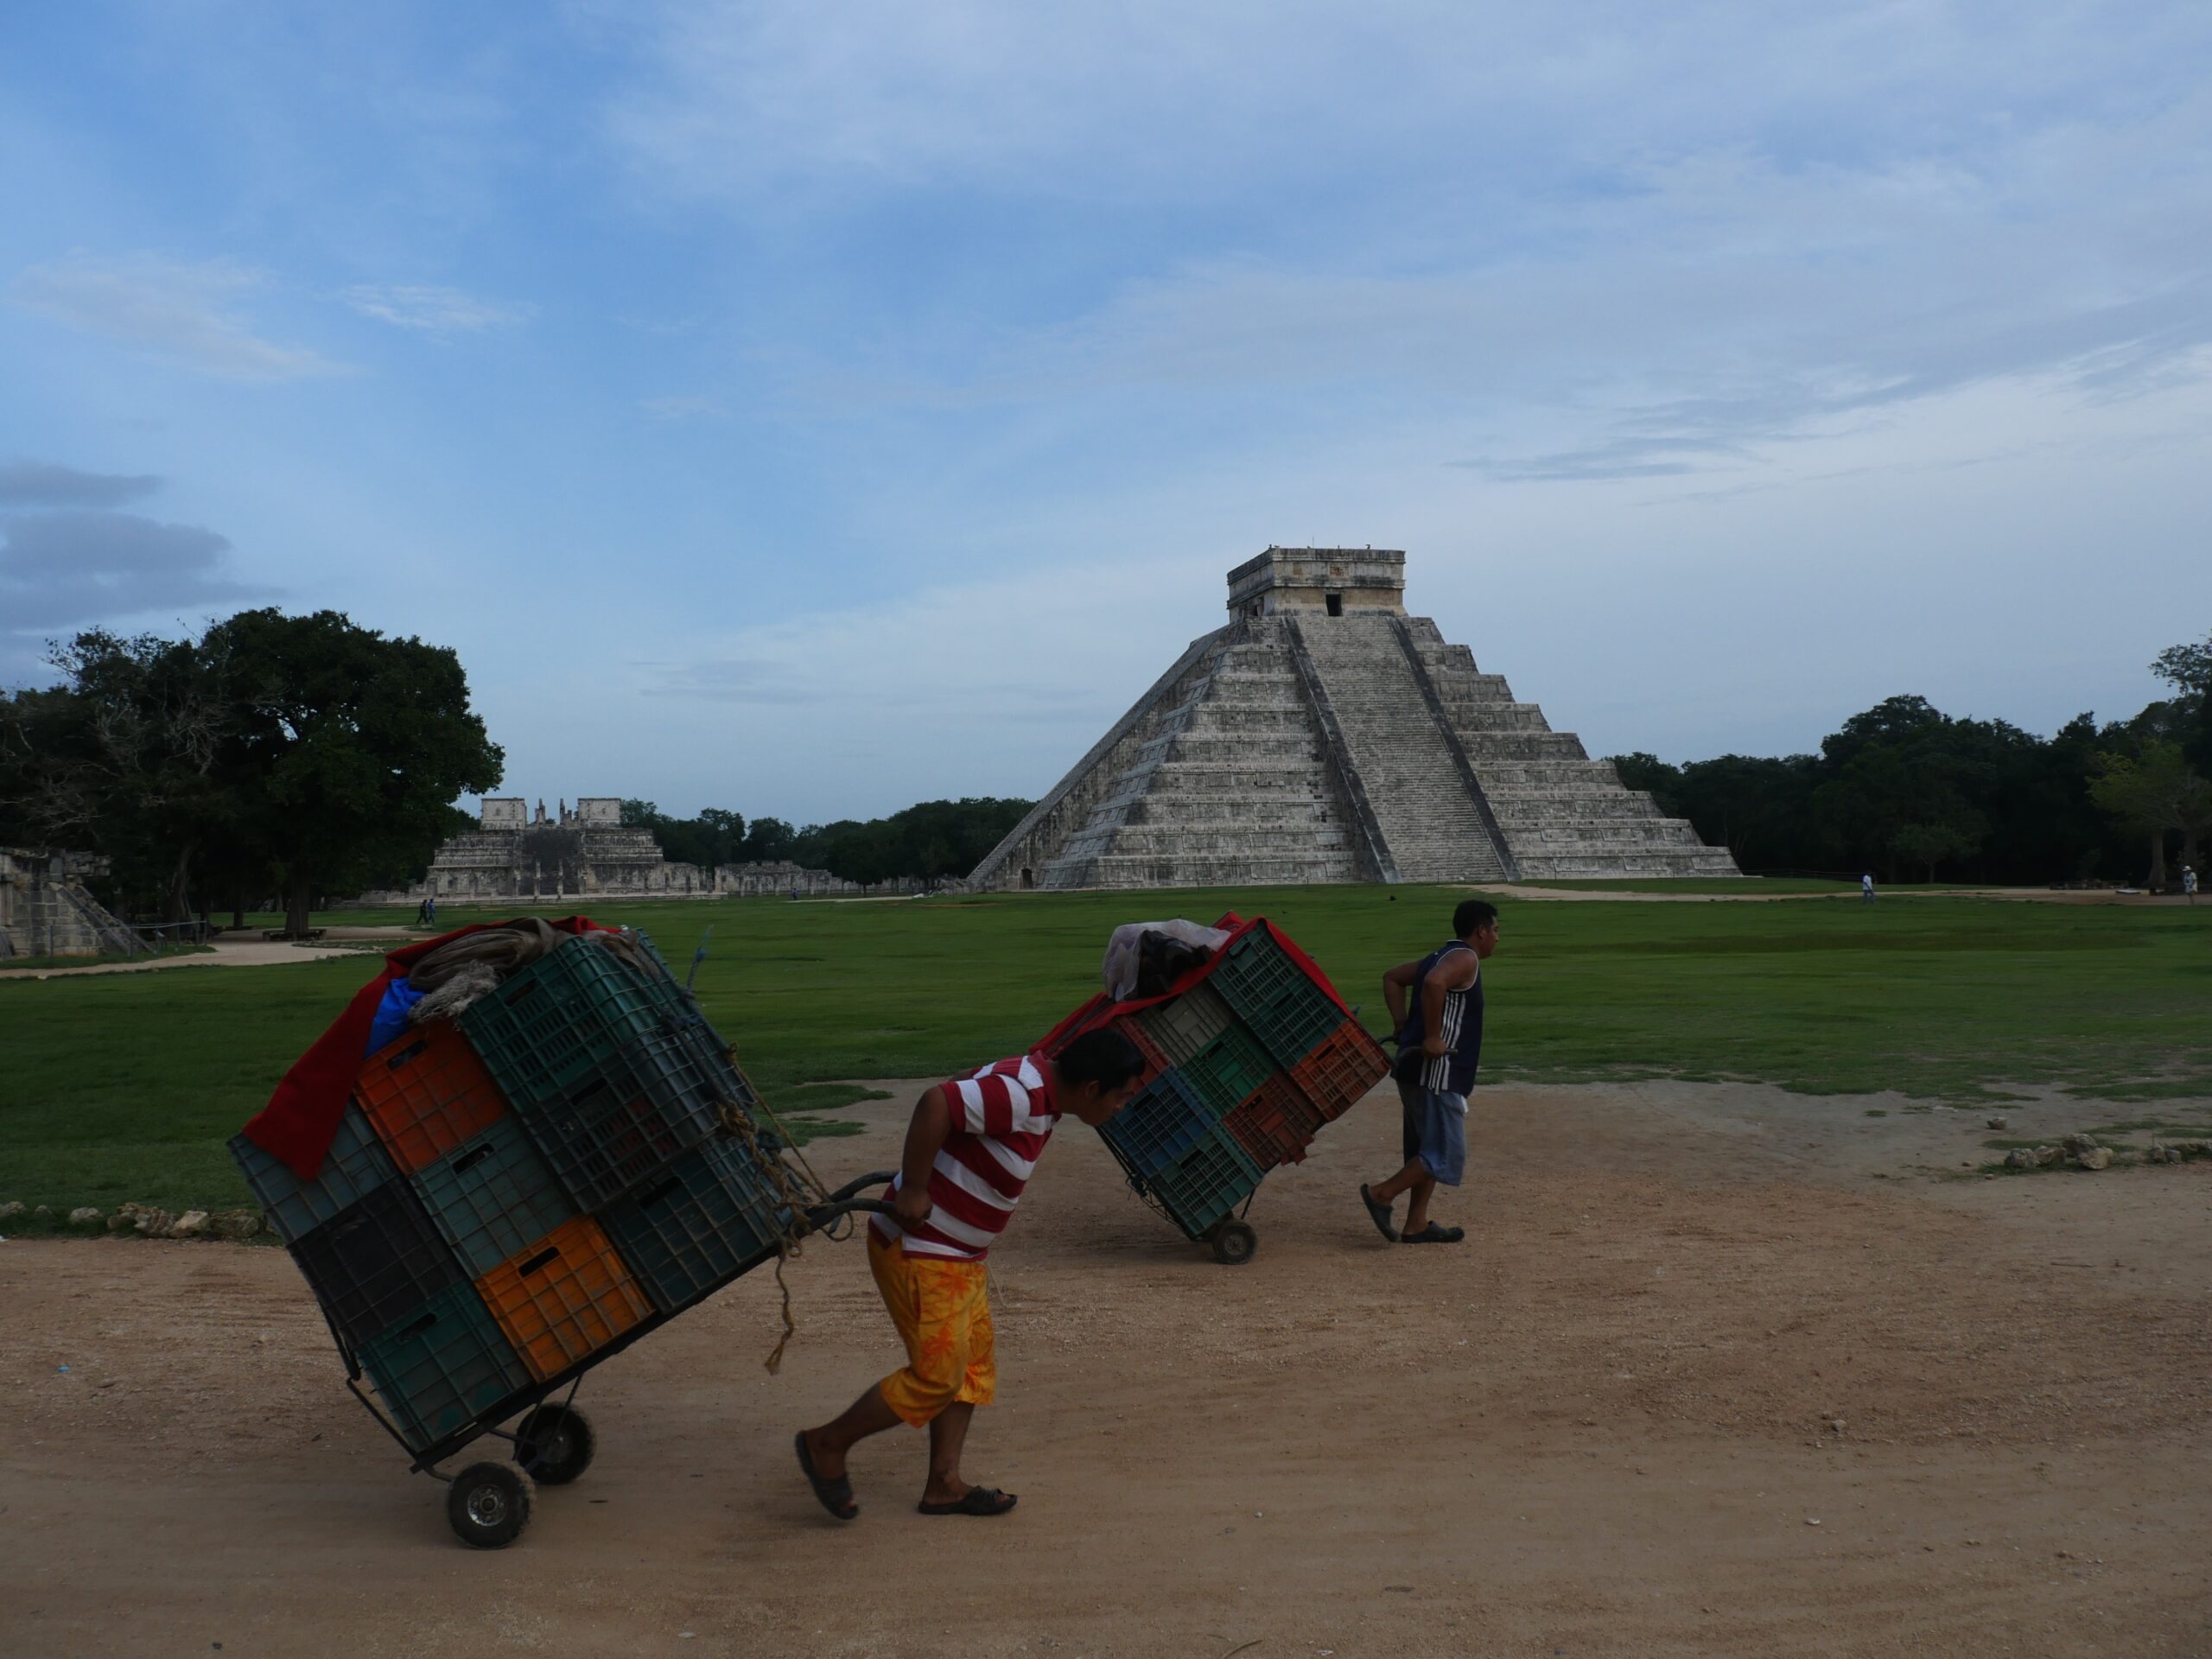 Souvenir vendors pack up their stalls at the end of the day in front of El Castillo in Chichen Itza, Mexico.